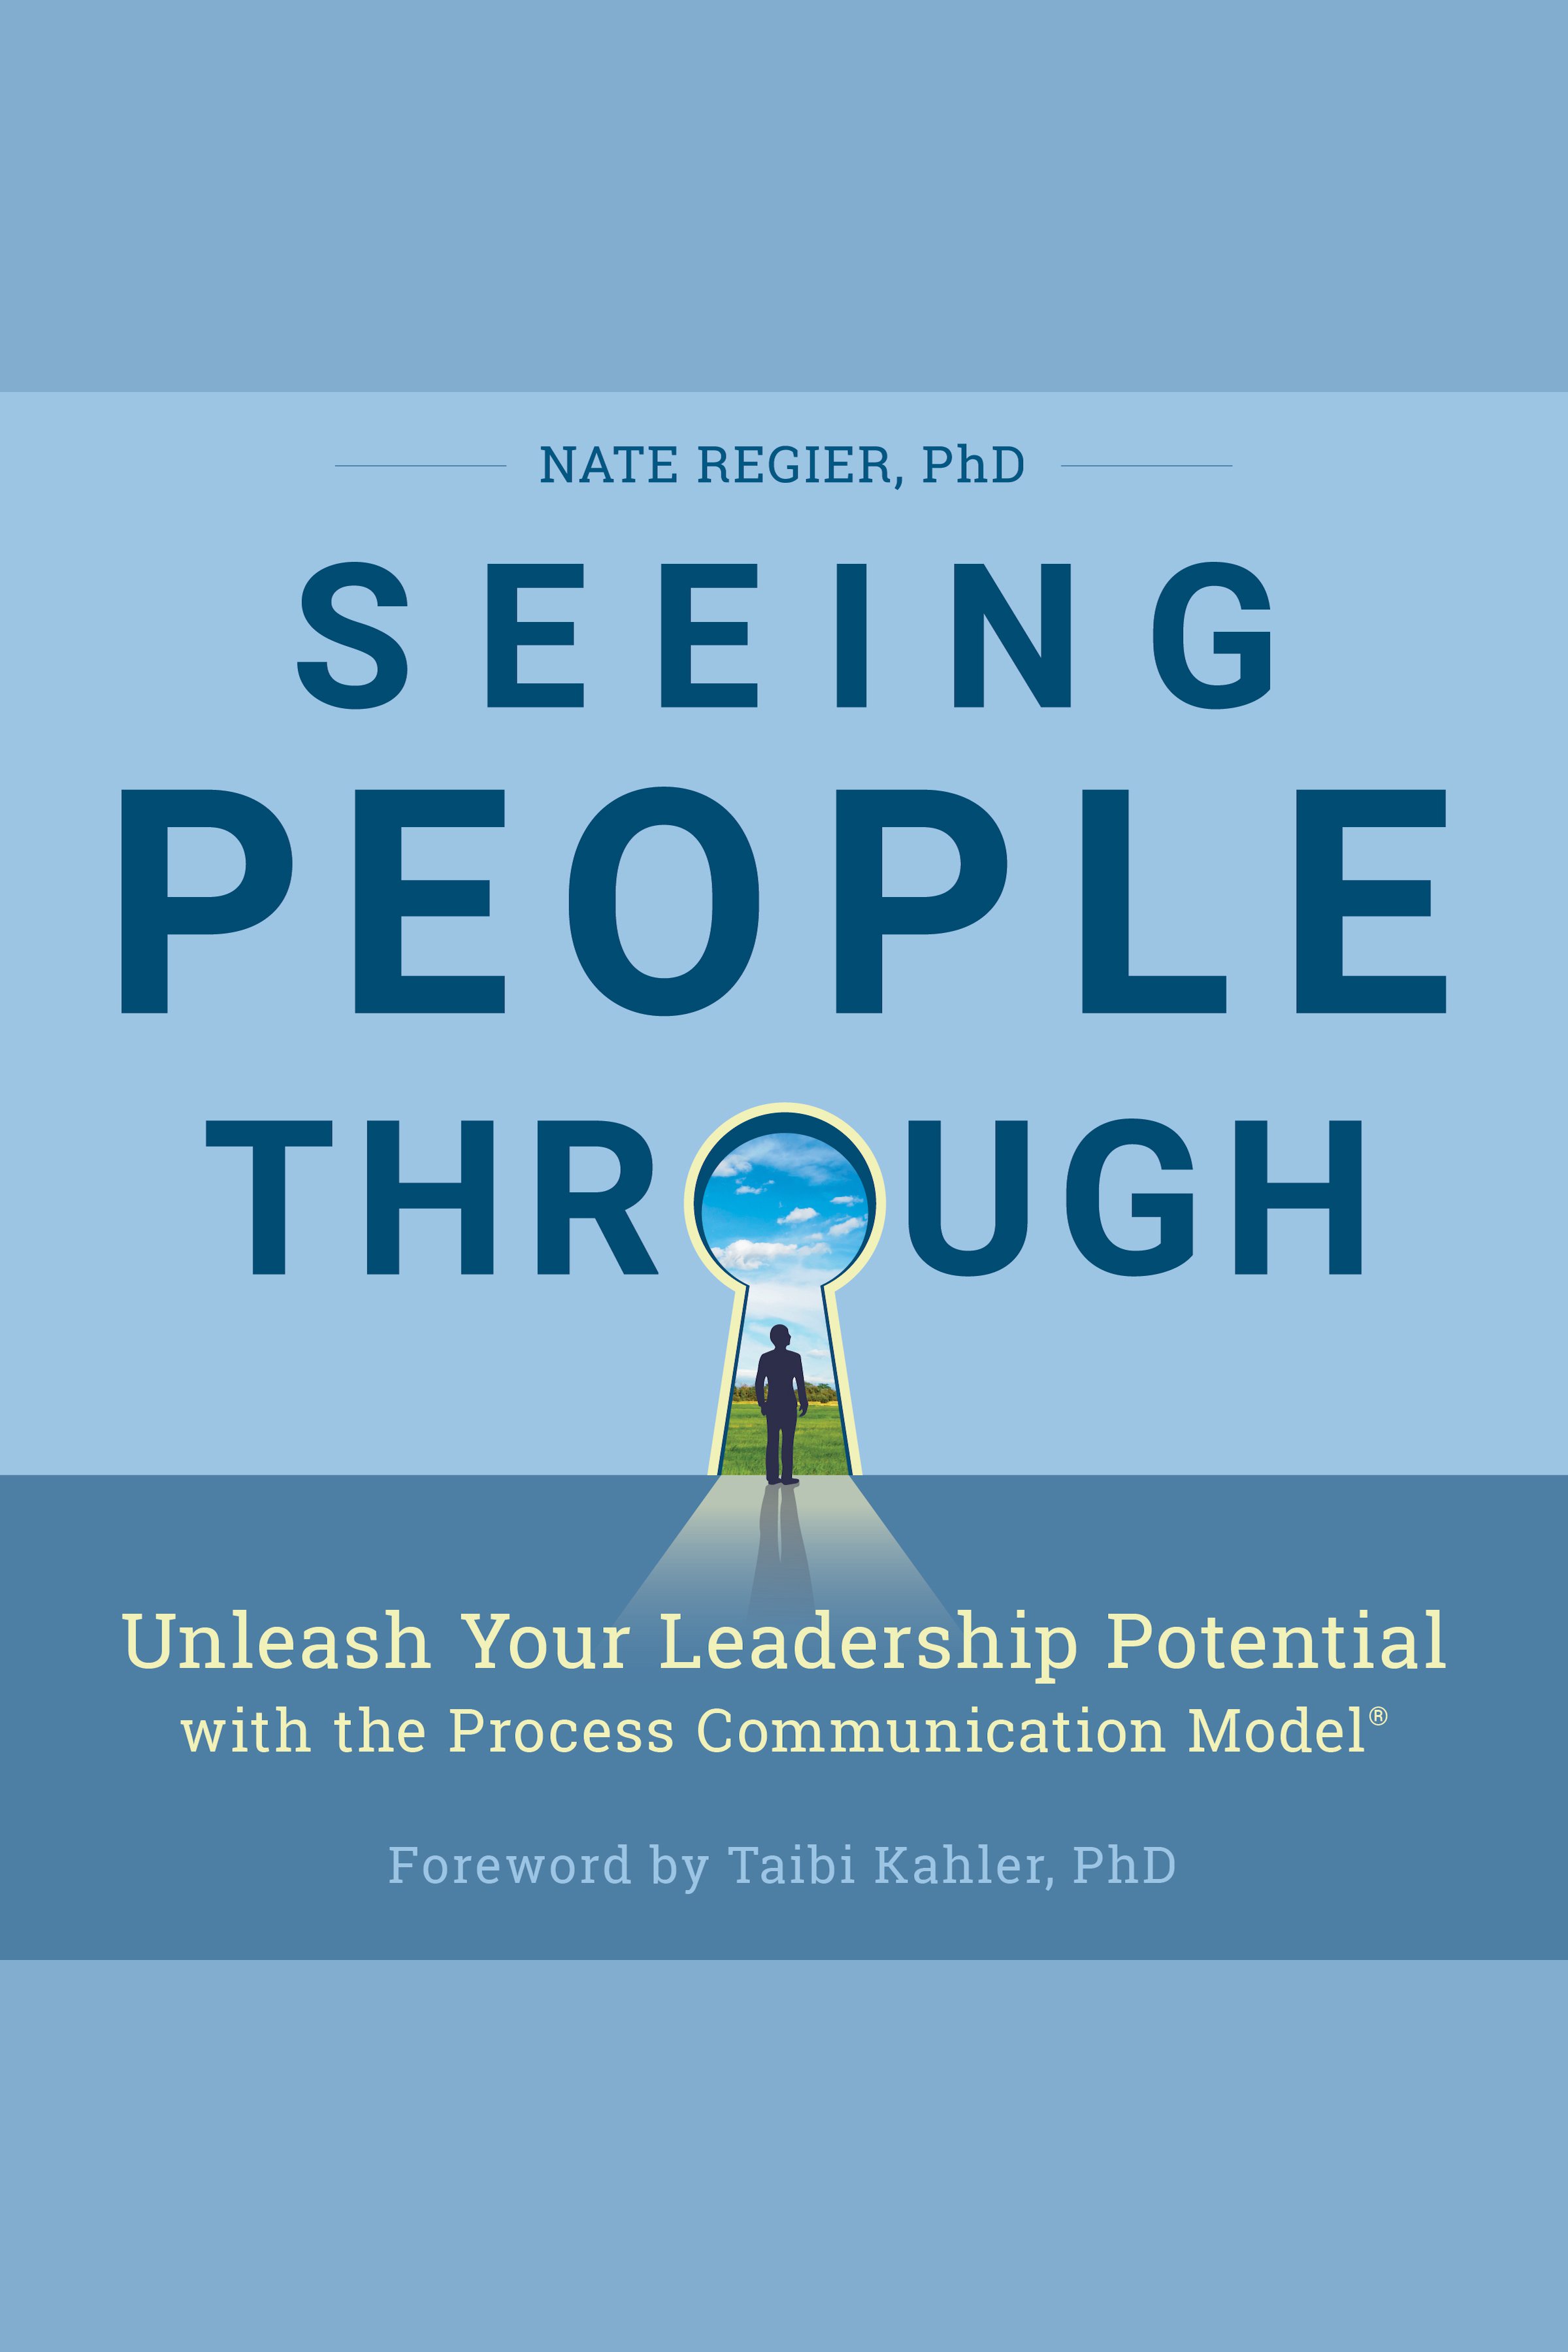 Seeing people through unleash your leadership potential with the process communication model® cover image